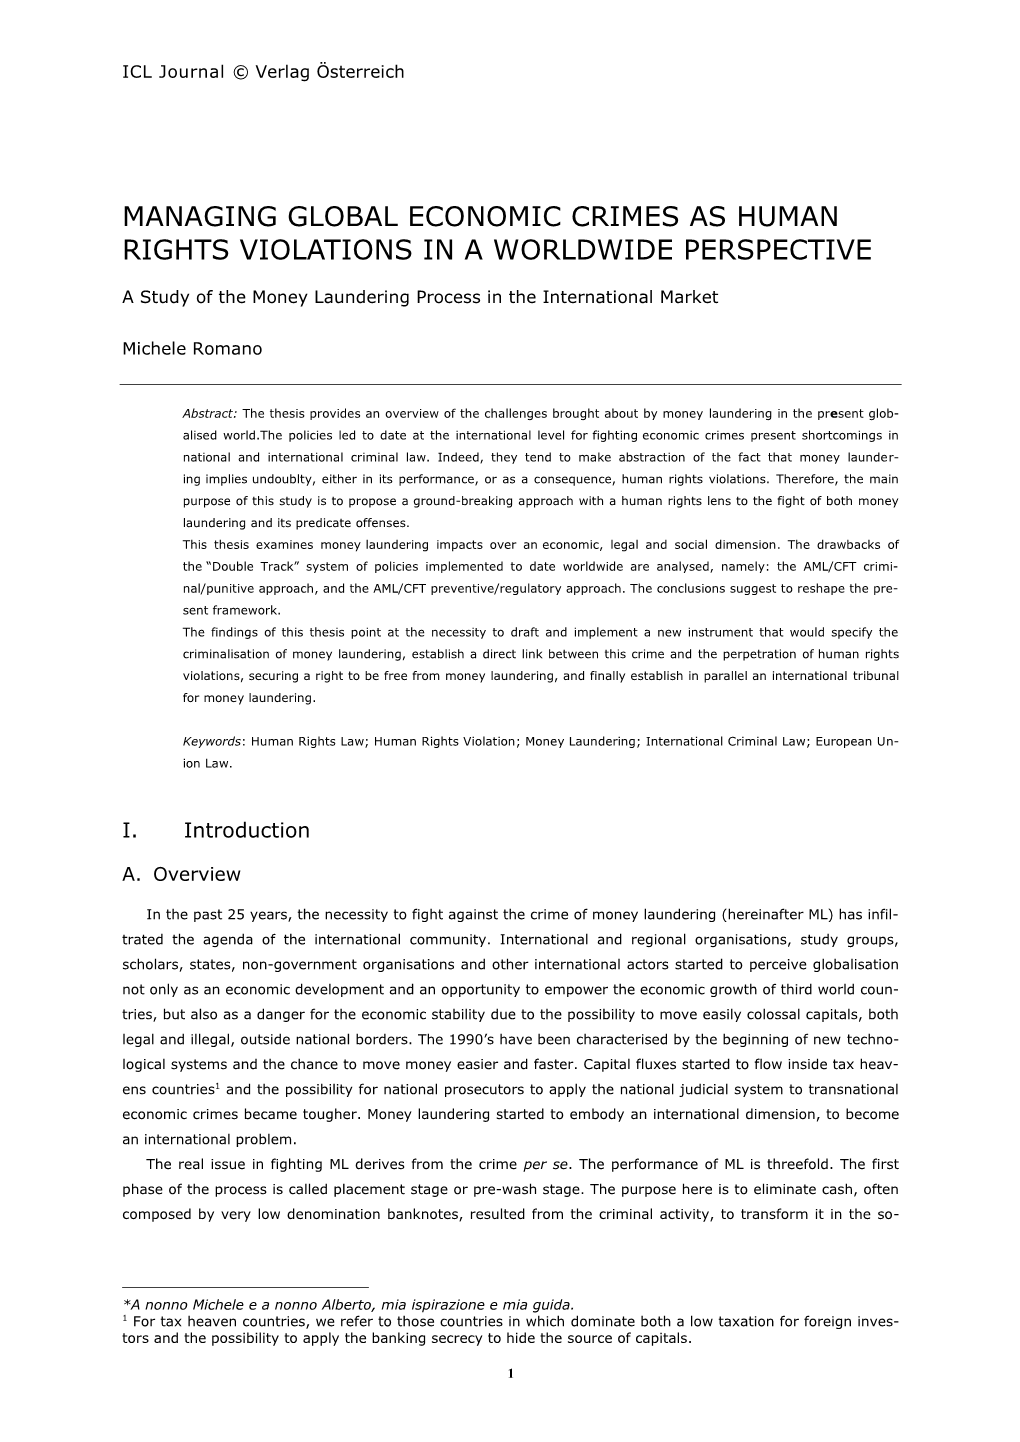 Managing Global Economic Crimes As Human Rights Violations in a Worldwide Perspective